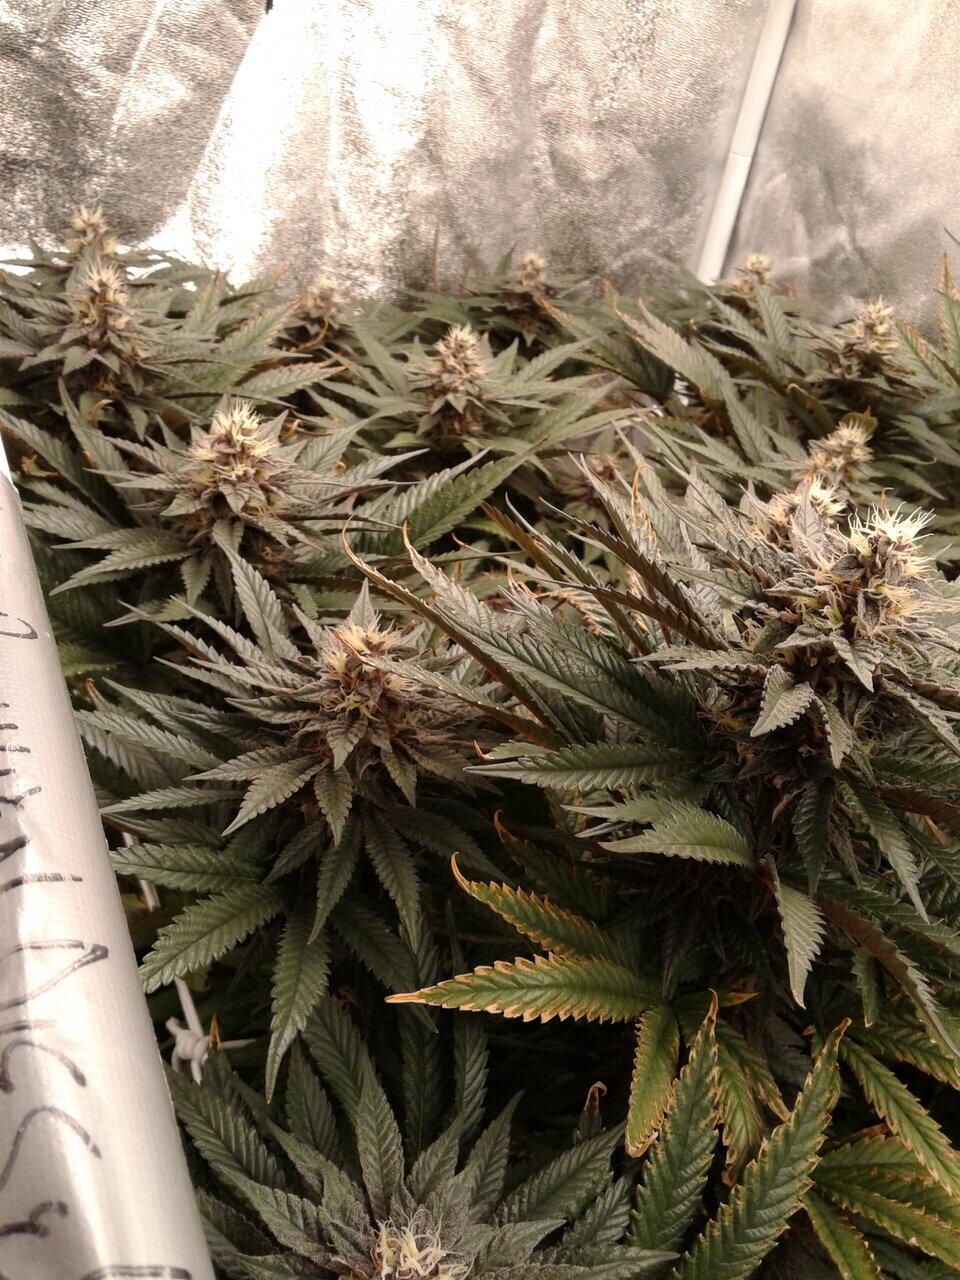 Black peruvian diesel bred and grown by me under ts 1000 13